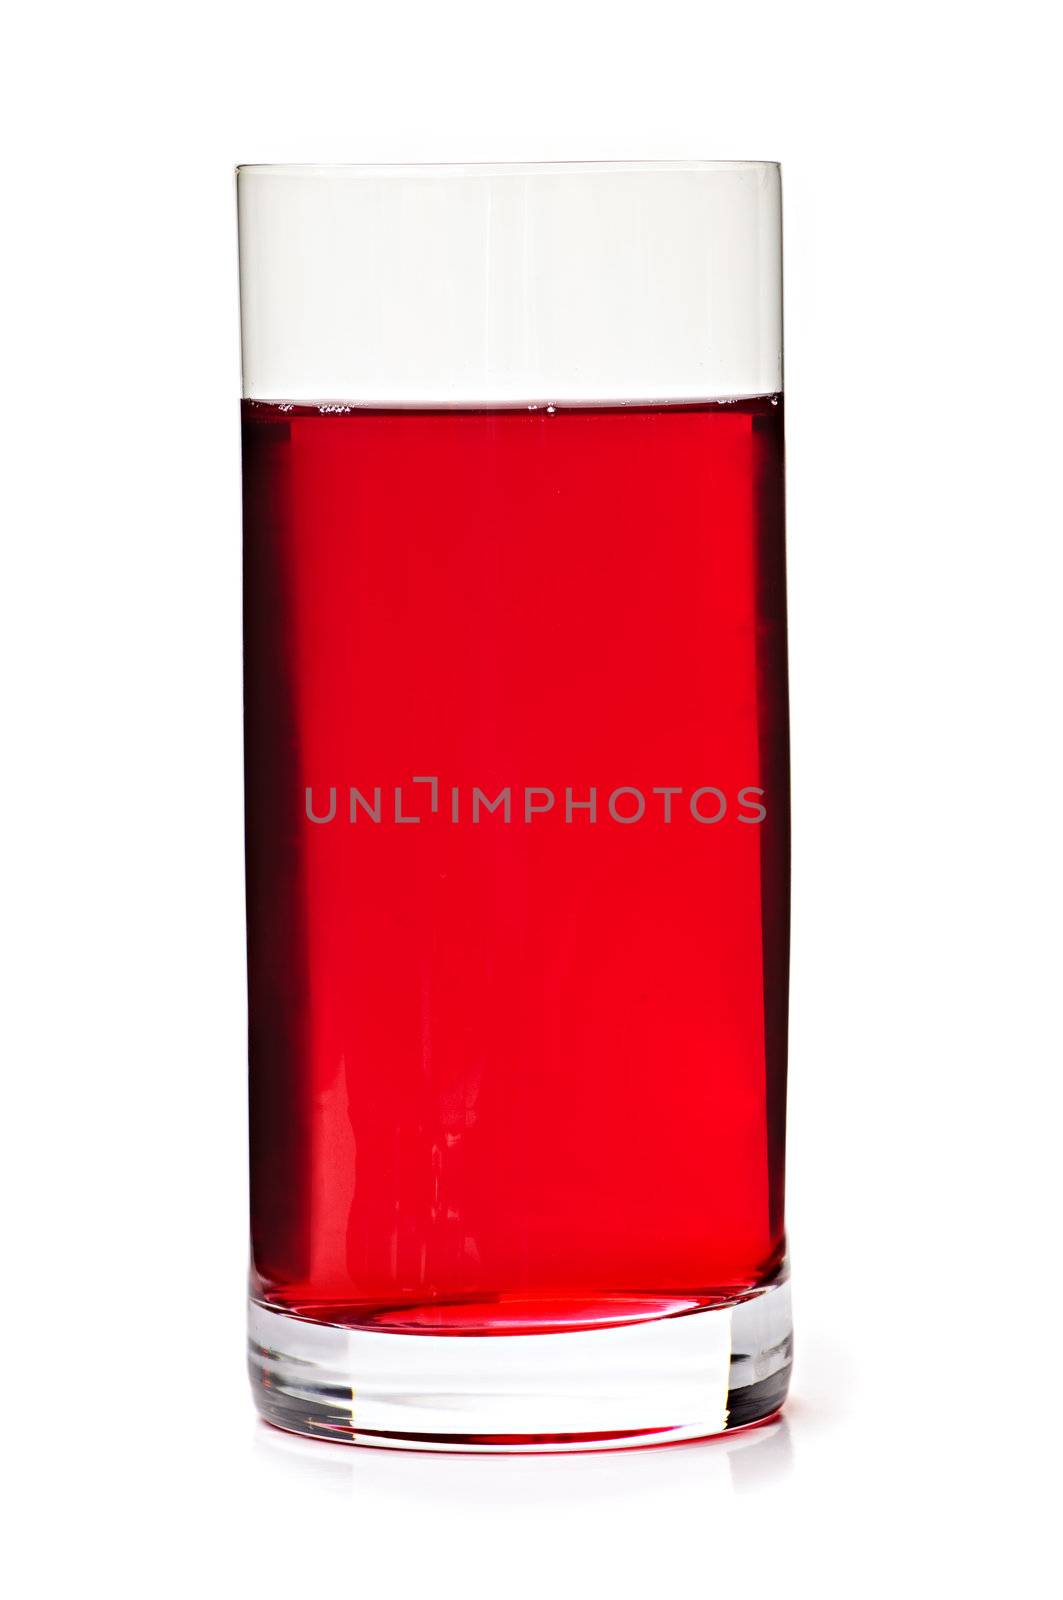 Cranberry juice in clear glass isolated on white background